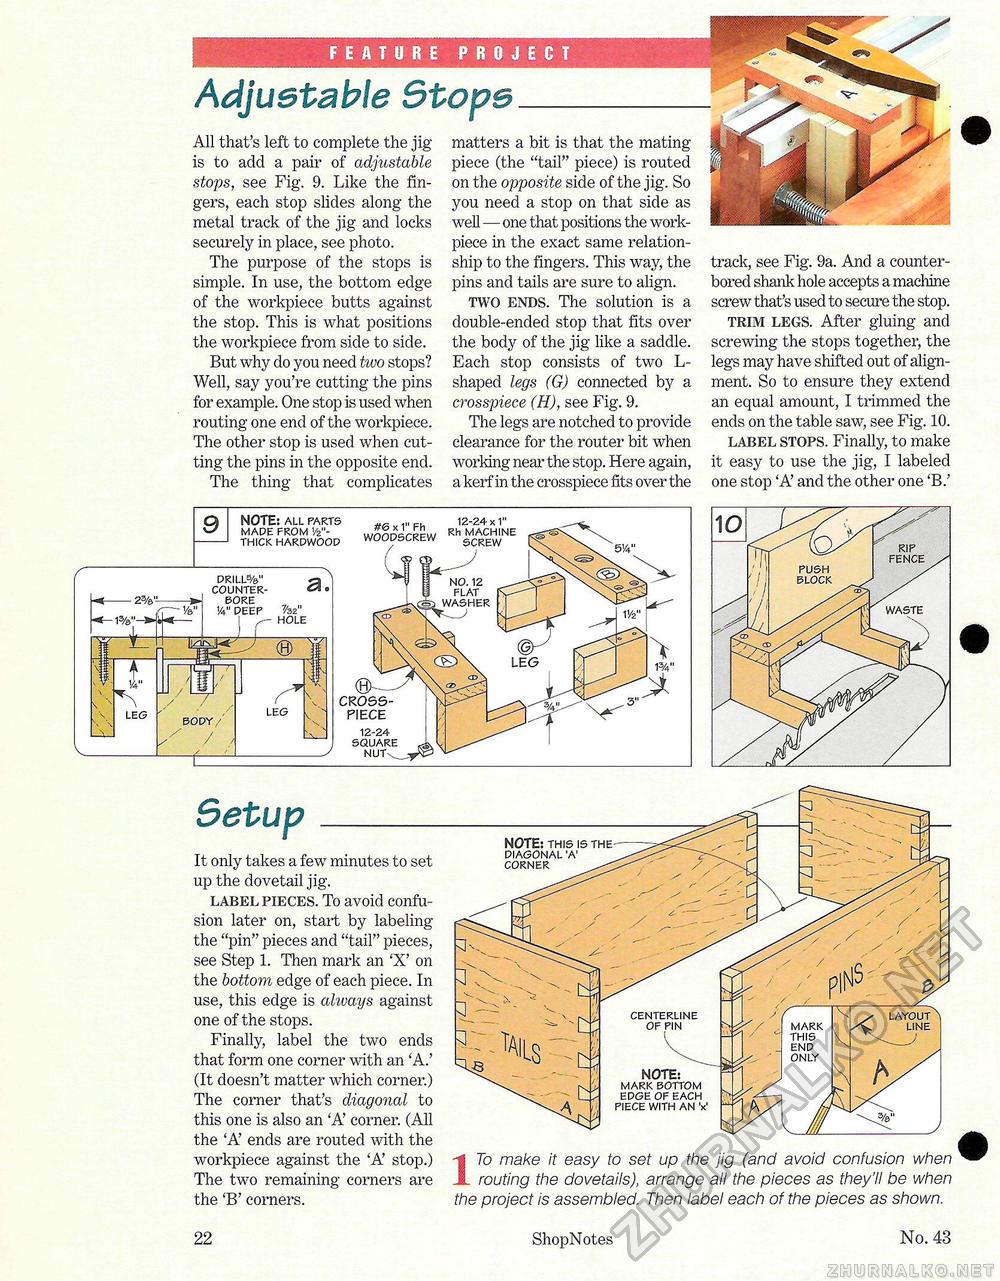 43 - Build Your Own Dovetail Jig,  22